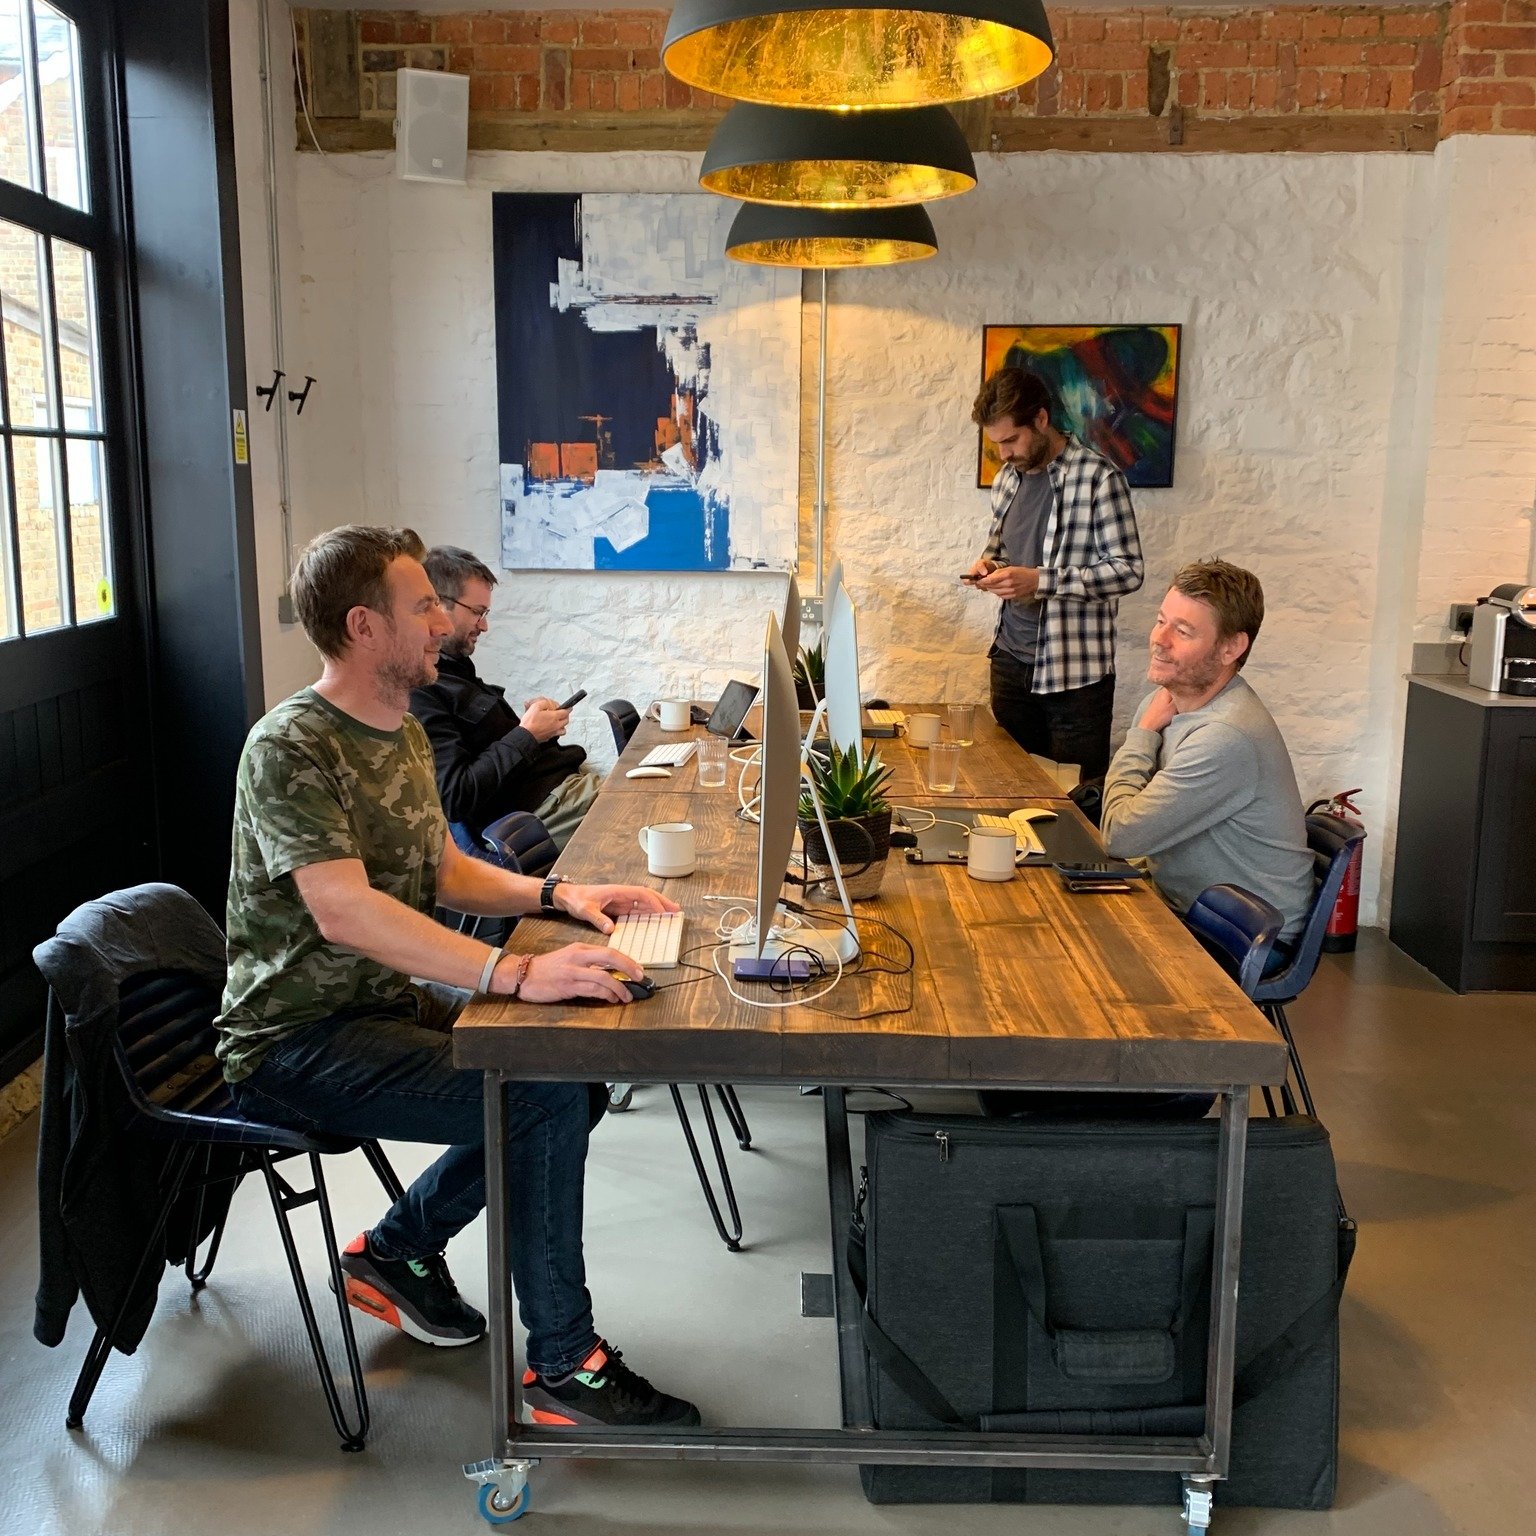 FIVE GREAT BENEFITS OF COWORKING

👉 Community &amp; Networking: One of the best things about coworking is the opportunity to connect with like-minded individuals from various backgrounds and industries. You're not just renting a desk; you're joining